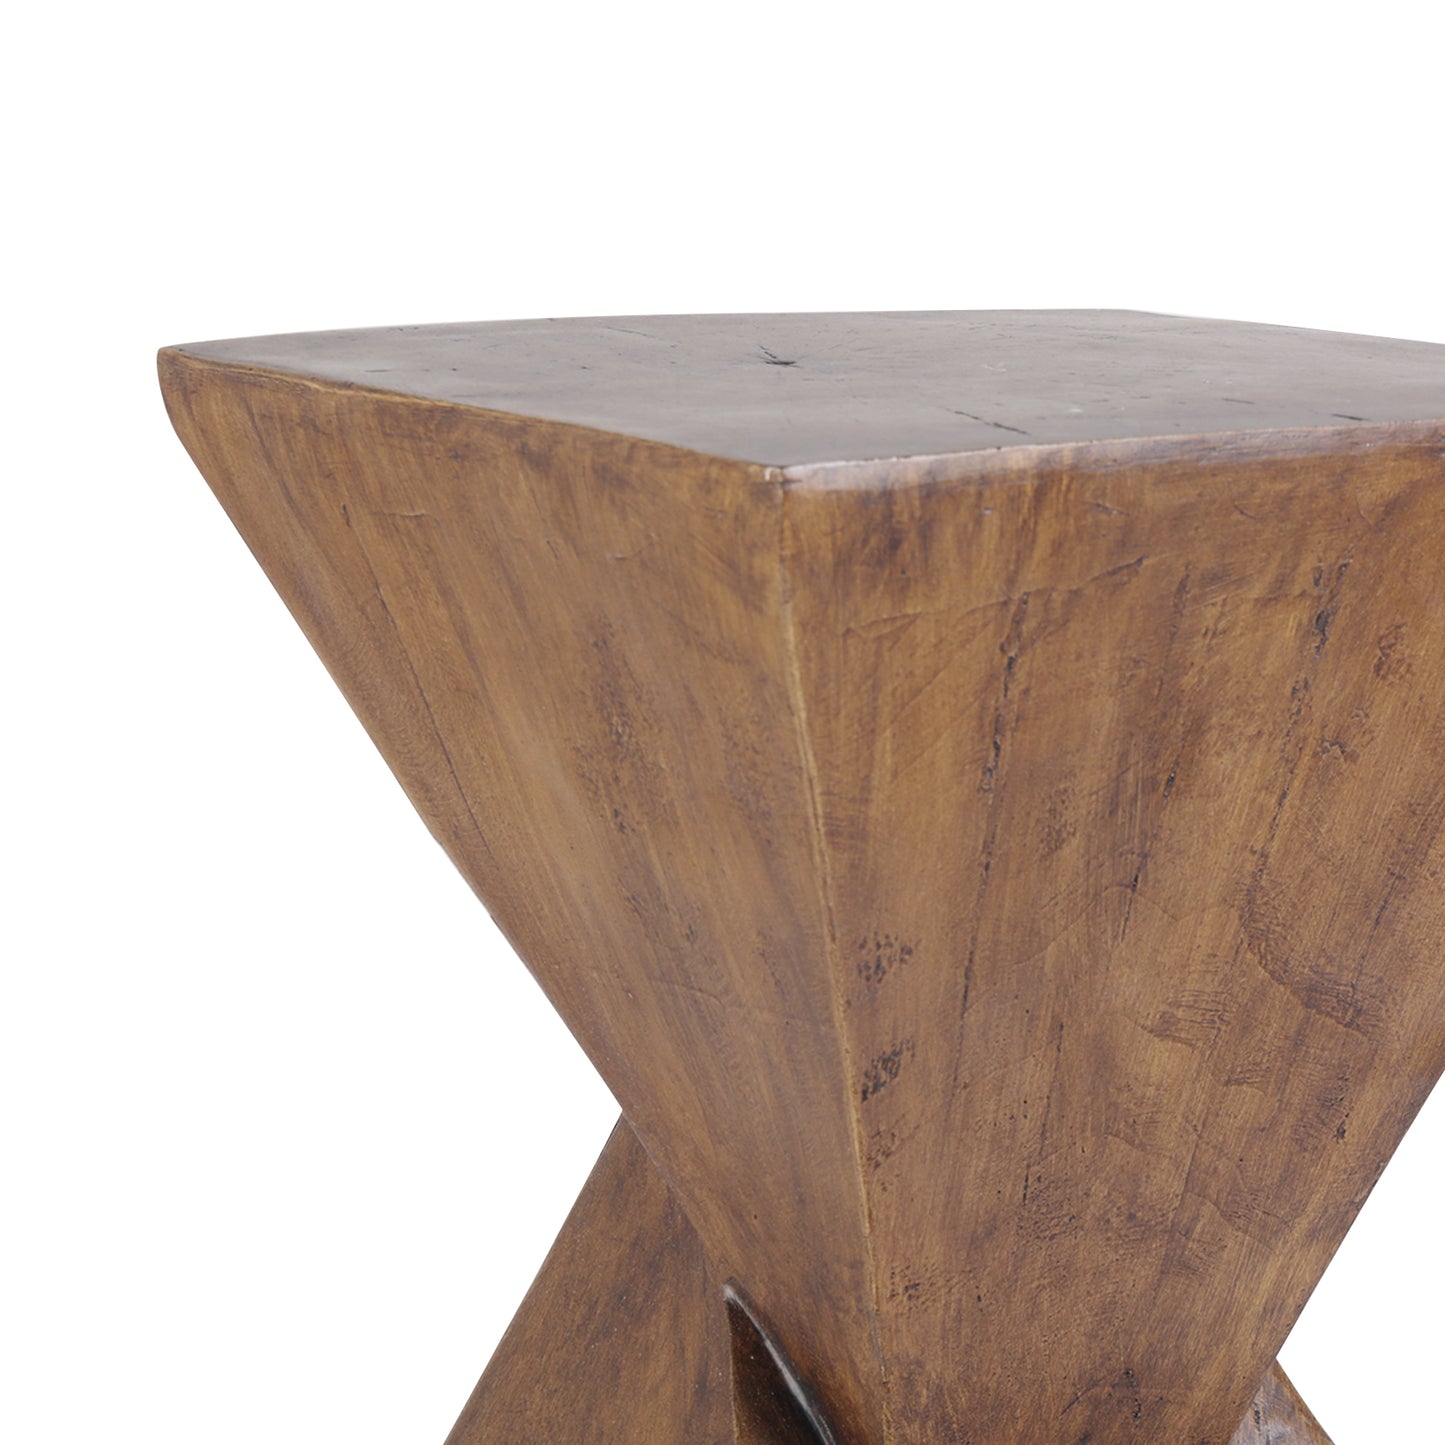 Modern Geometry Antique Side Table │ Lightweight Concrete Wooden Table Furniture Besontique Home Decor Living Room